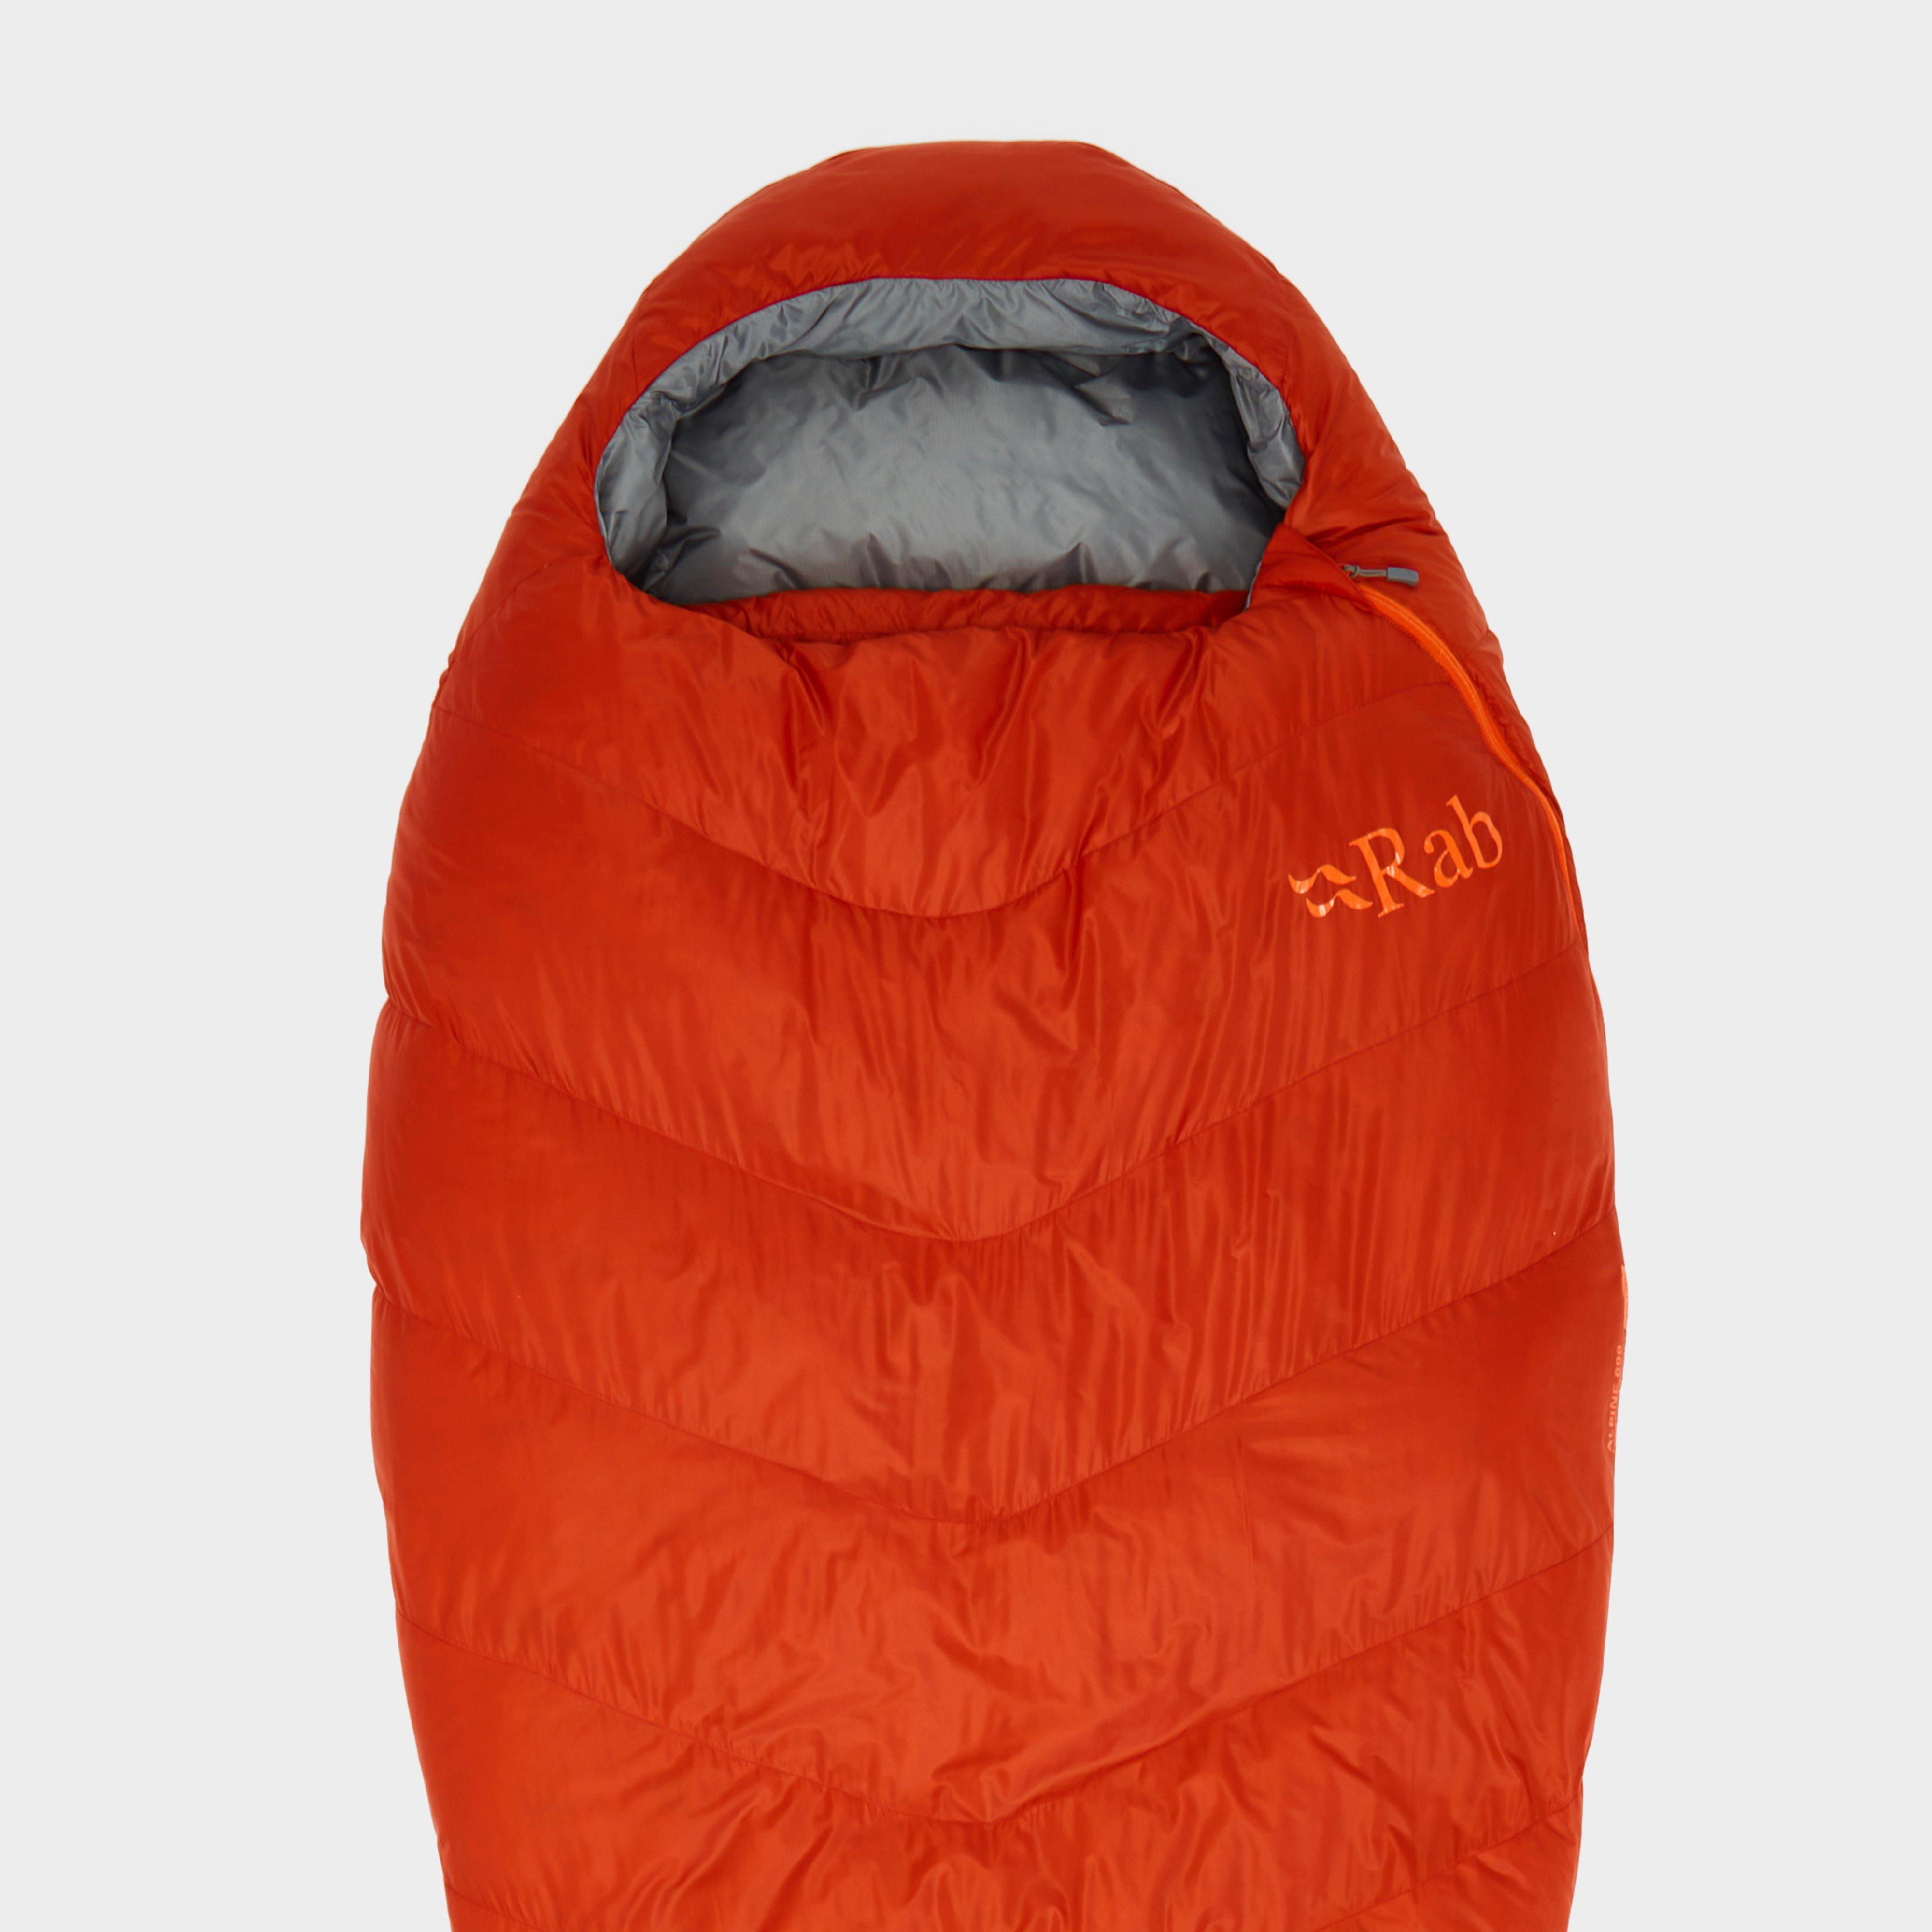 Rab Alpine 600 Down Sleeping Bag - Cly/cly  Cly/cly